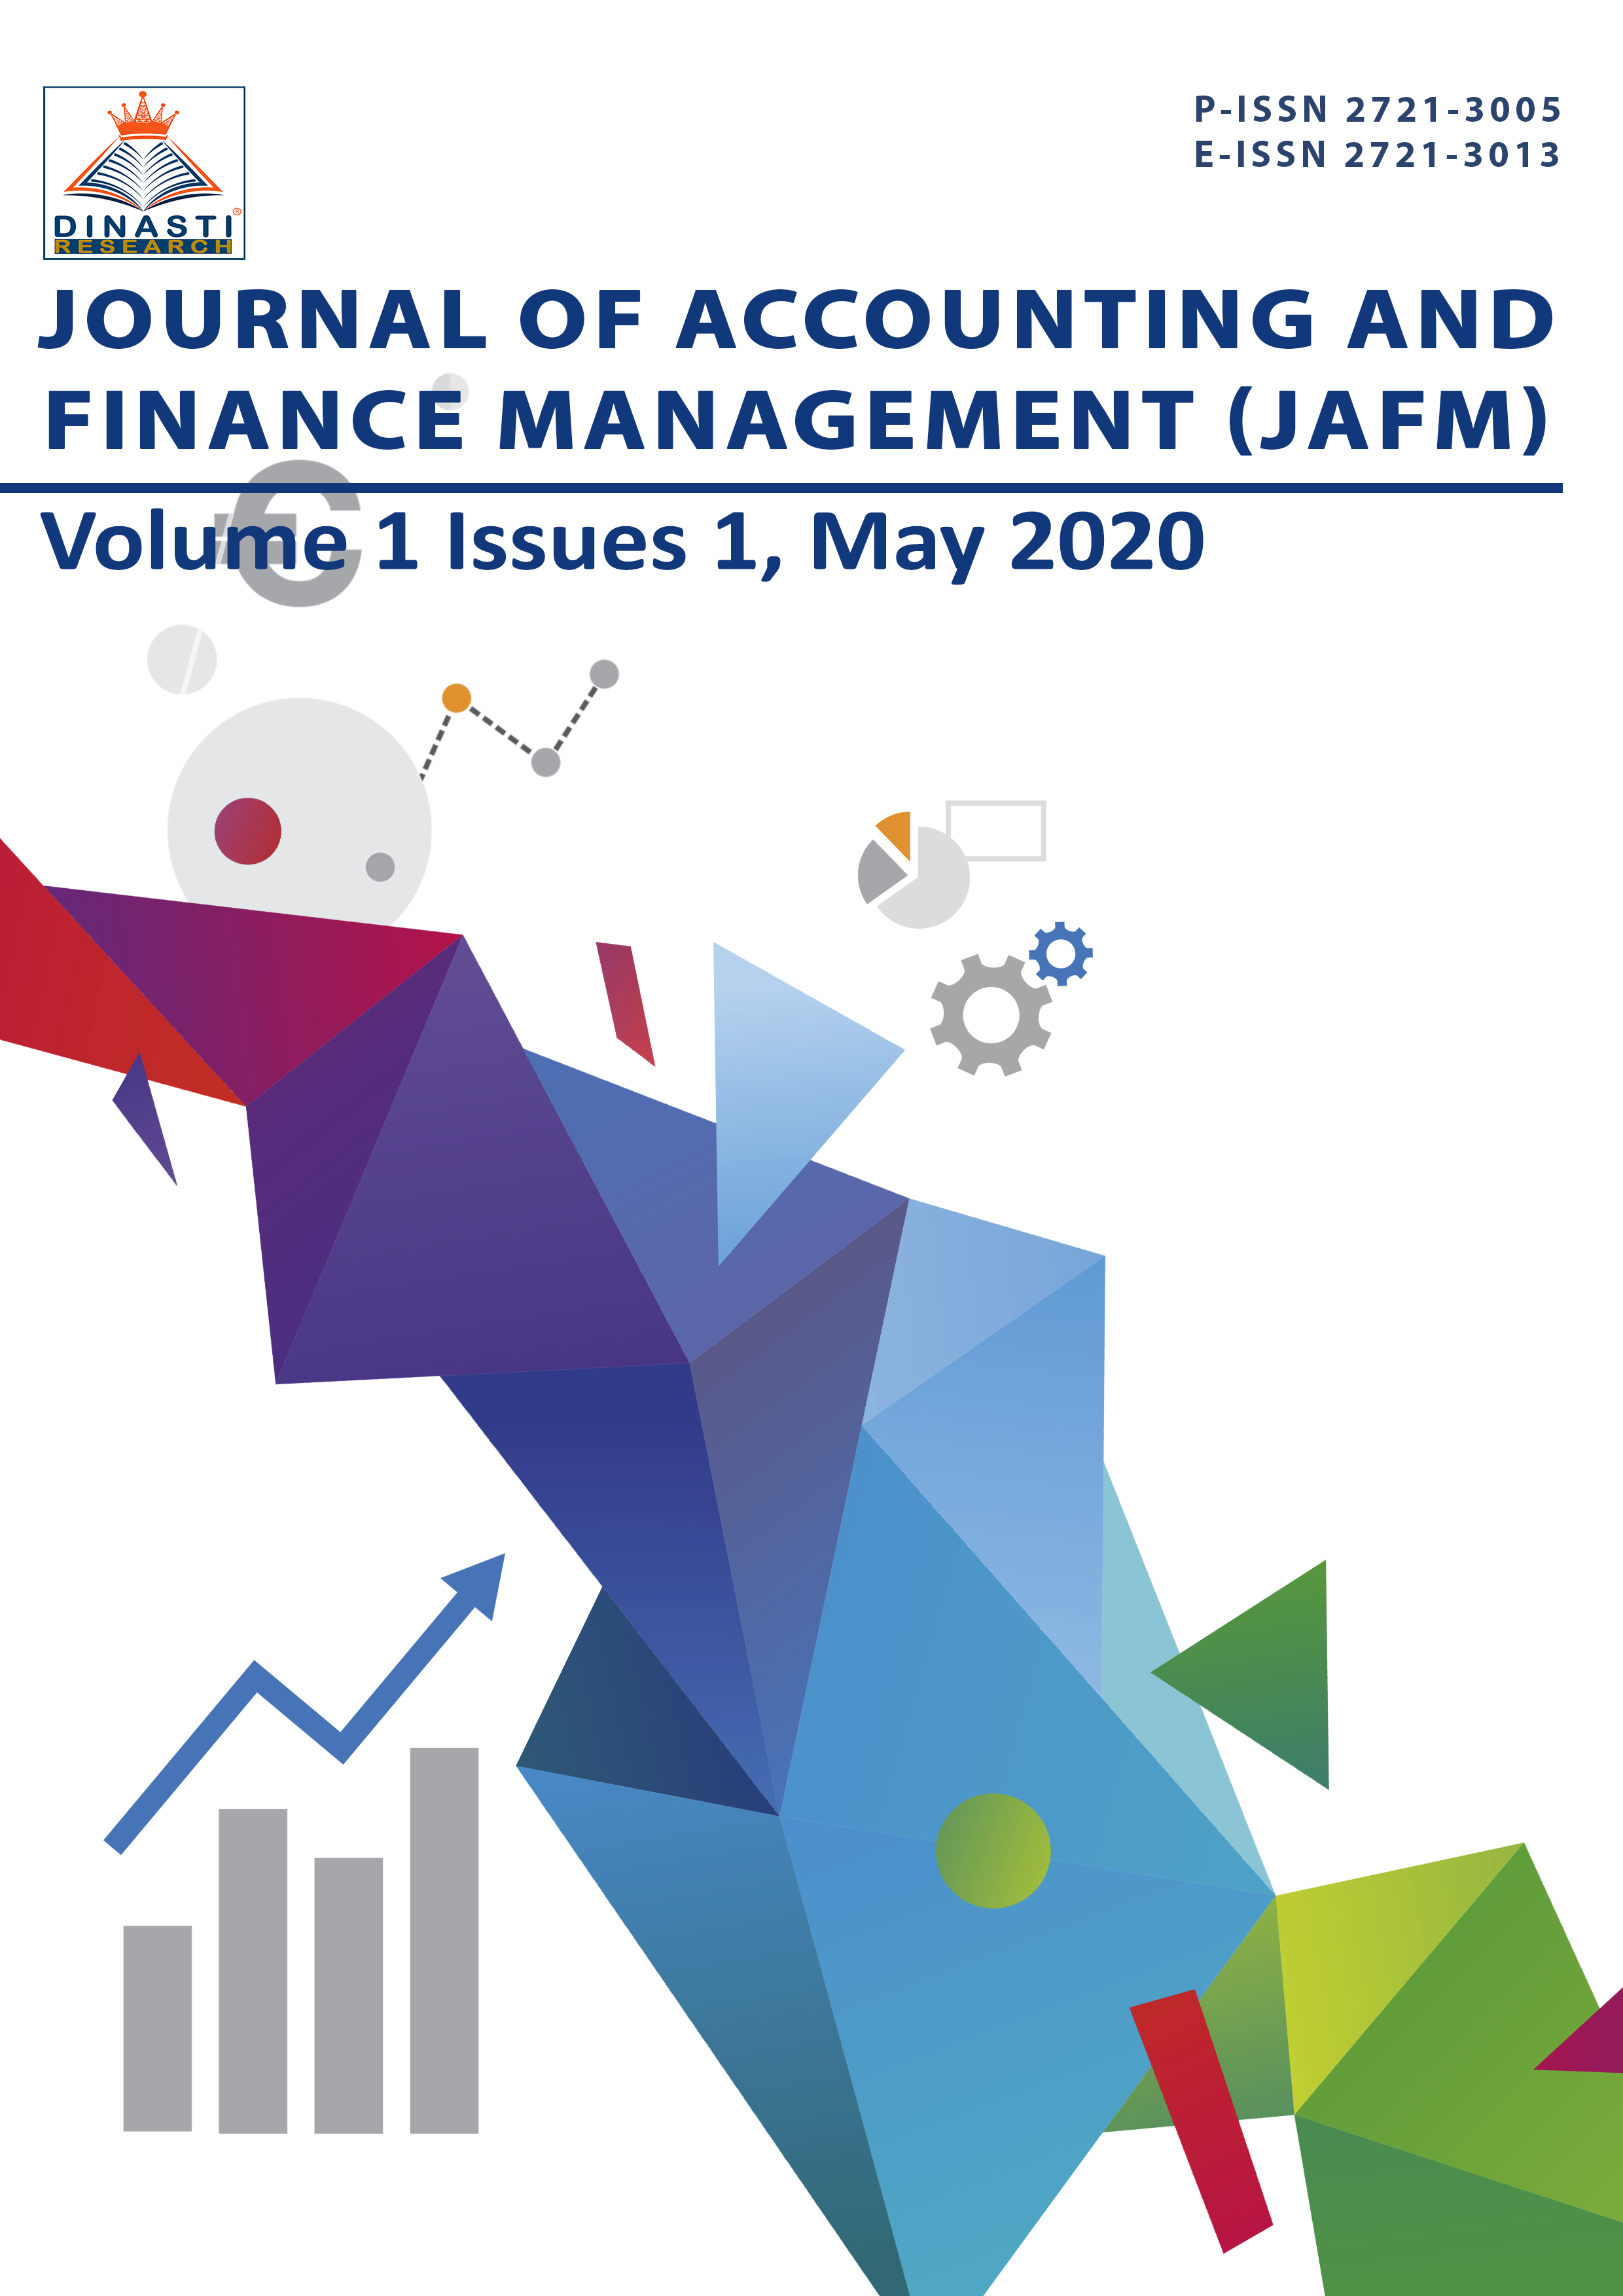 					View Vol. 1 No. 1 (2020): Journal of Accounting and Finance Management (March-April 2020)
				